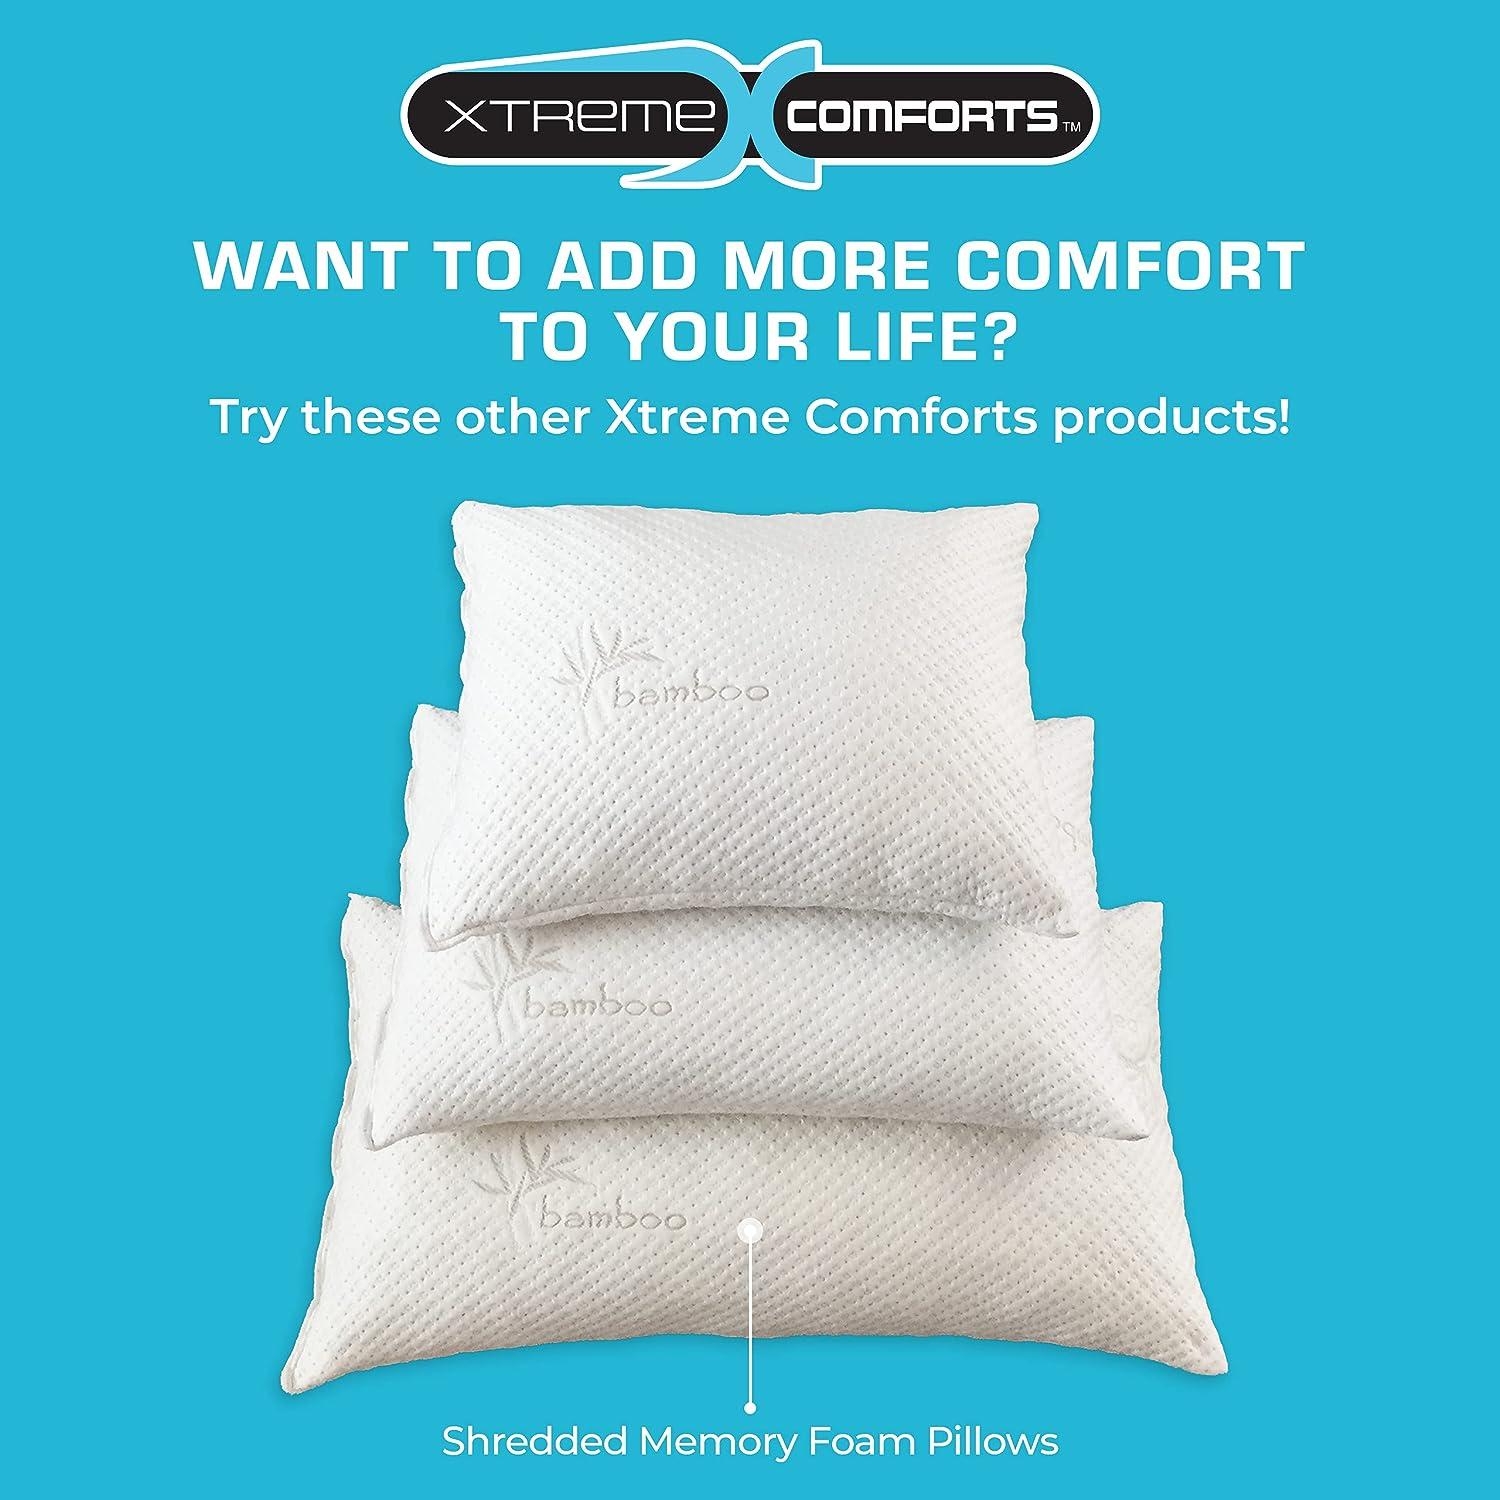 Xtreme Comforts 5 LBS Bean Bag Filler w/Shredded Memory Foam - Pillow  Stuffing Material for Couch Pillows Cushions Bean Bag Refill Filling & More  Poly Fil/Polyfill Stuffing Needs (5 Pounds)